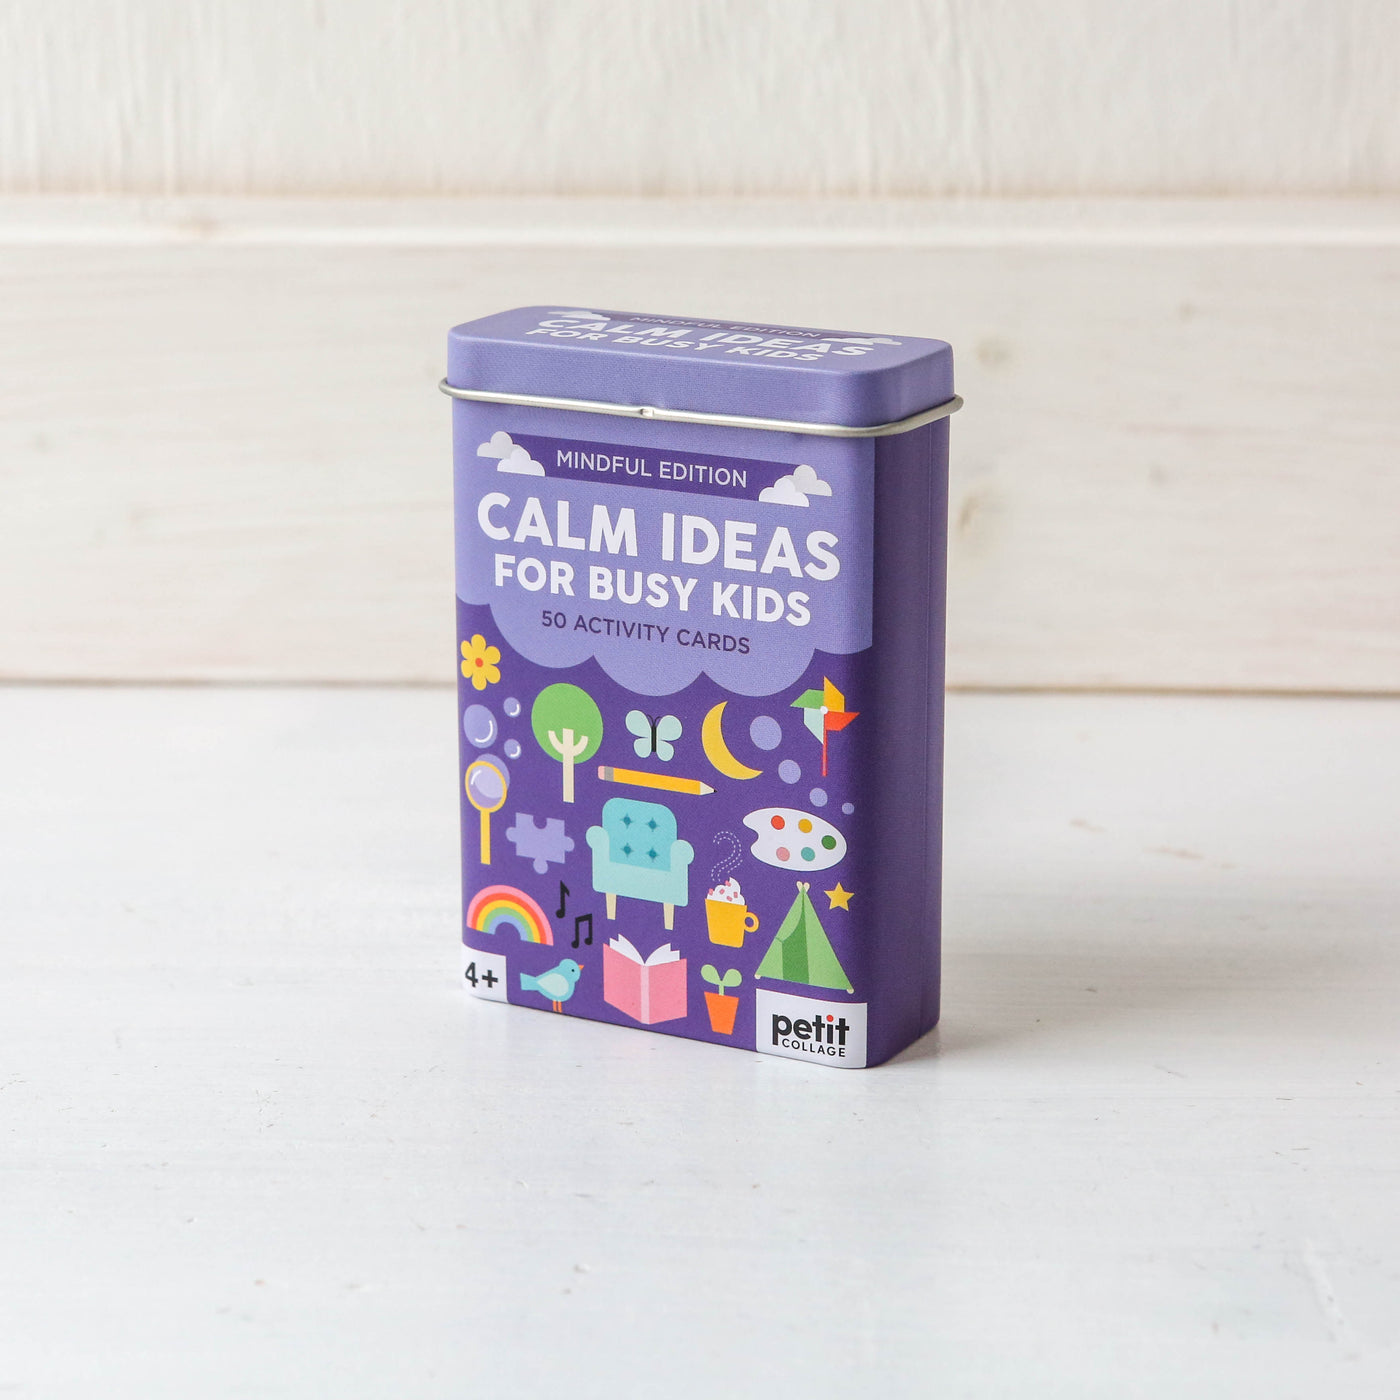 Calm Ideas for Busy Kids - Mindful Edition